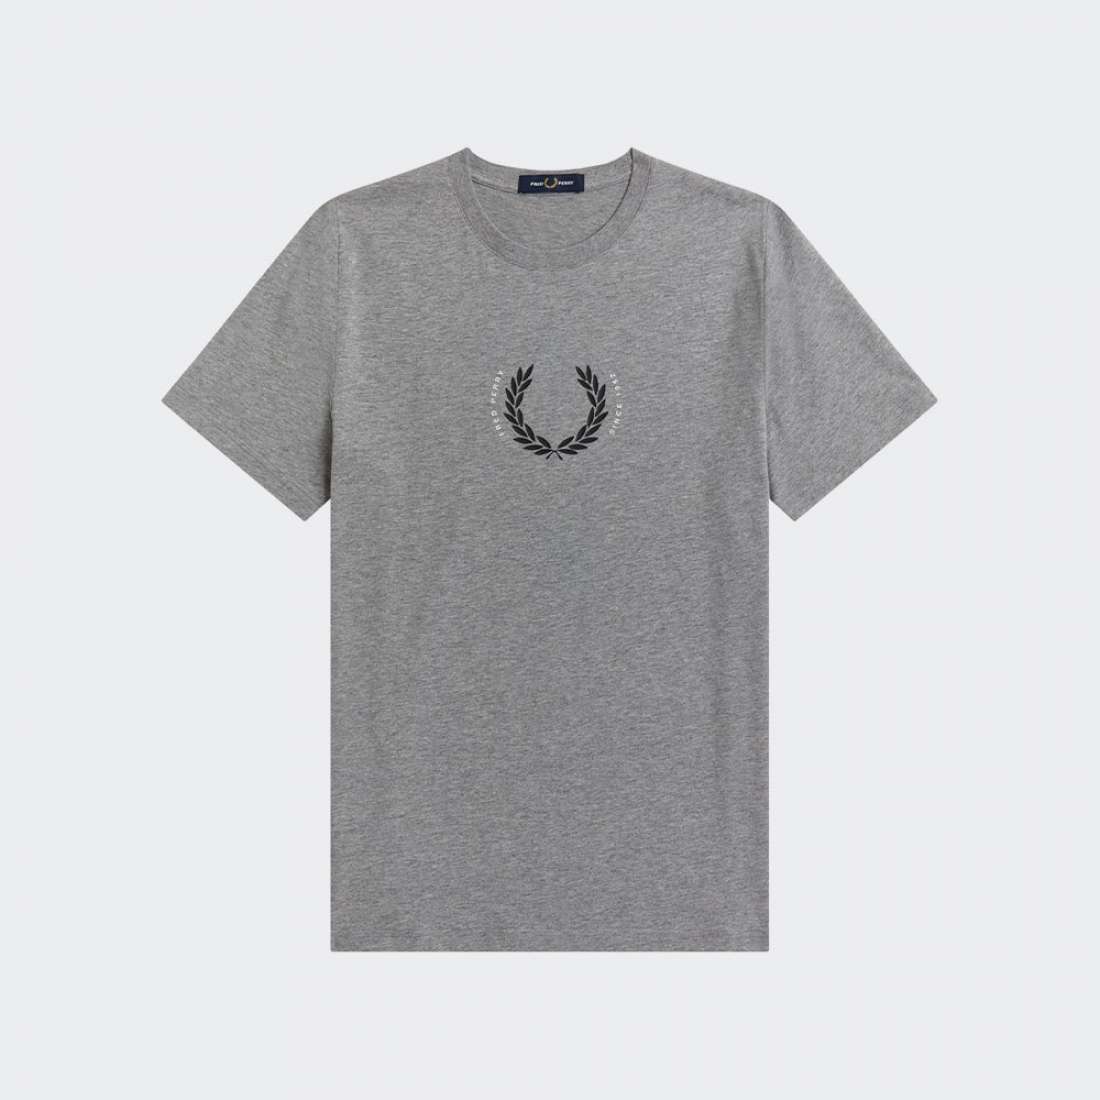 T-SHIRT FRED PERRY M2665 STEEL MARL